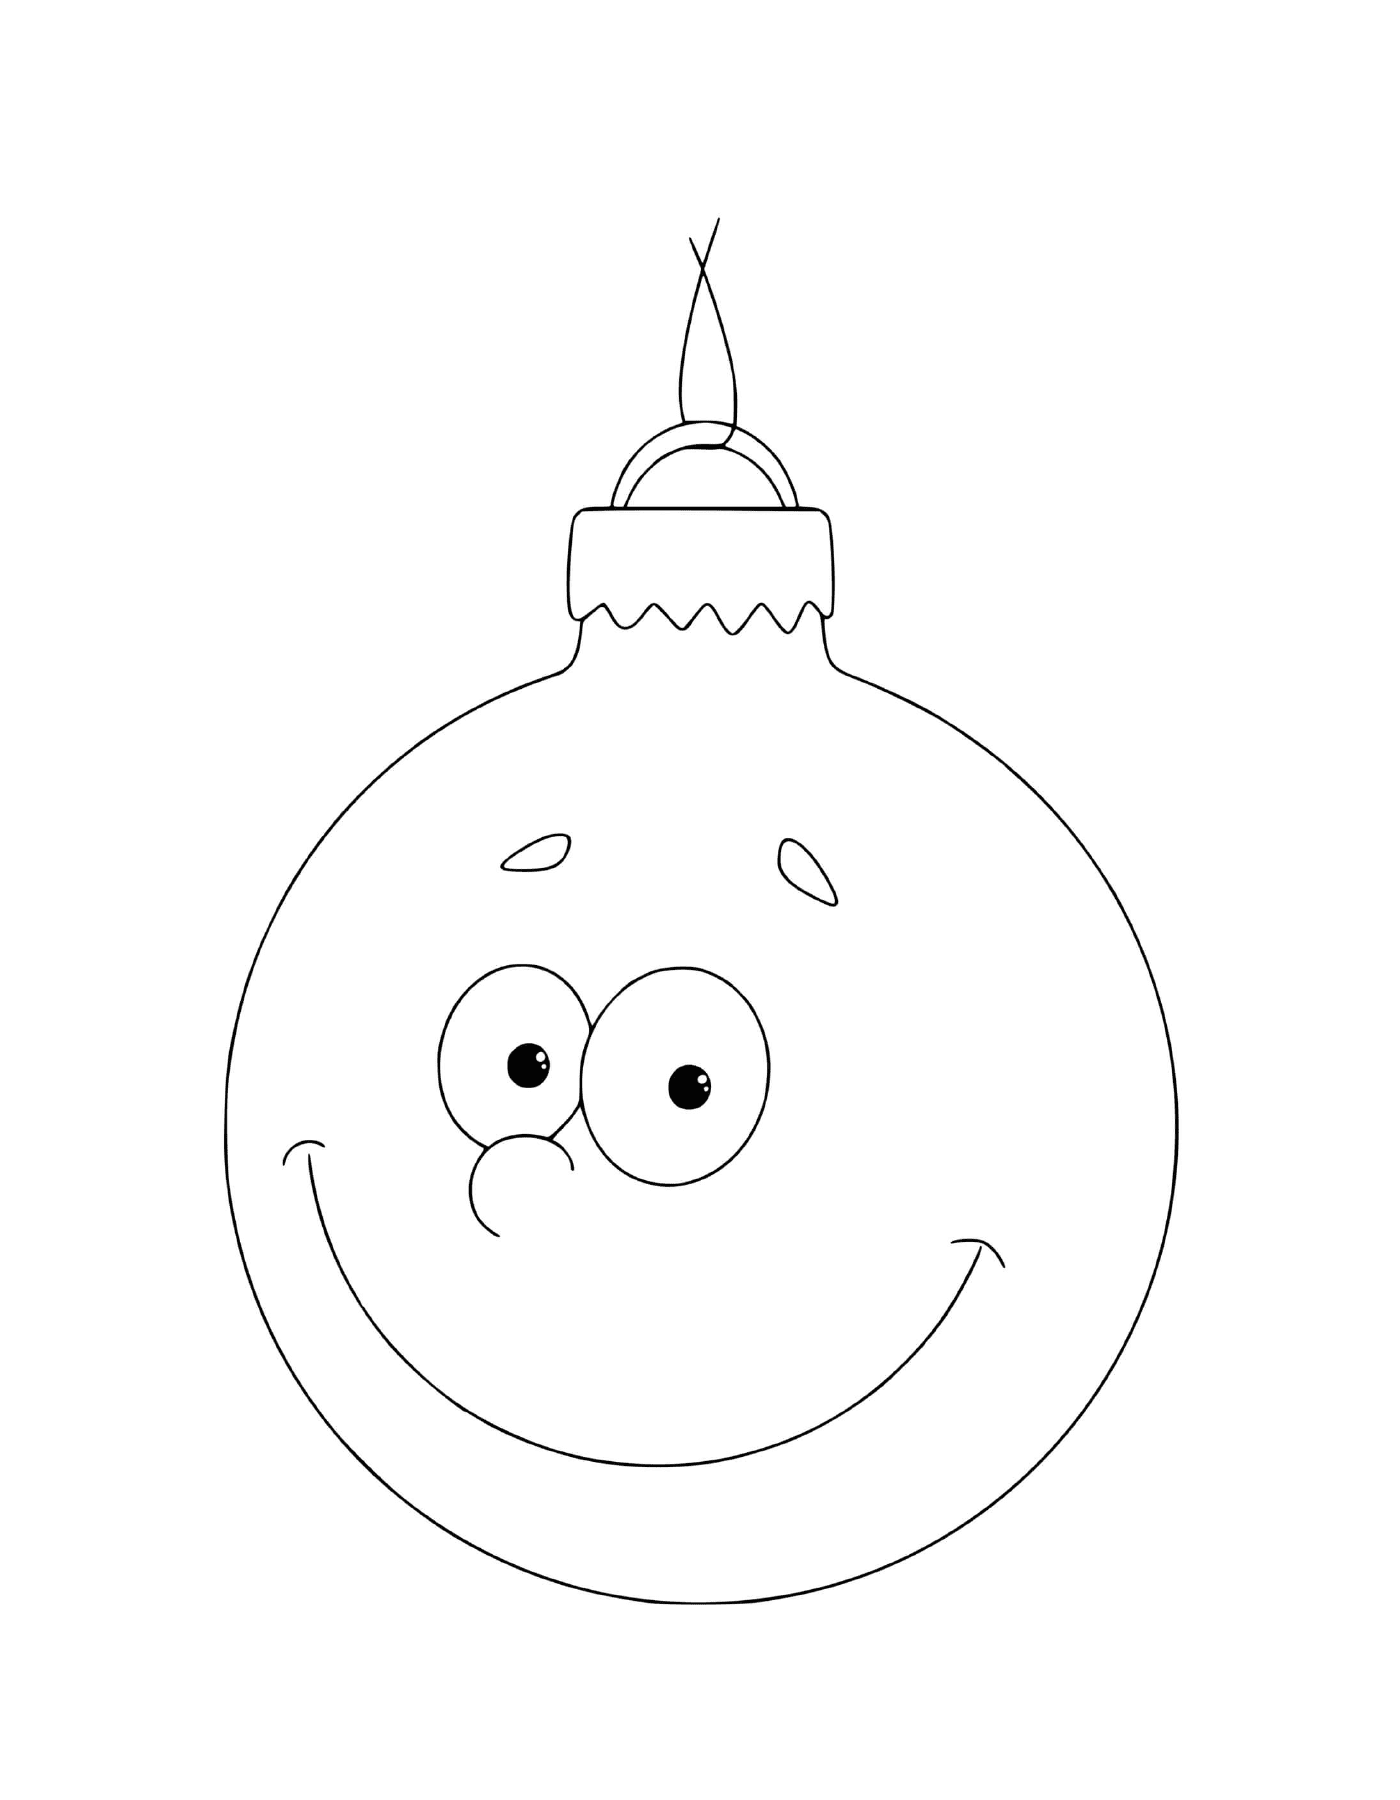  A Christmas ball with eyes and a smile 